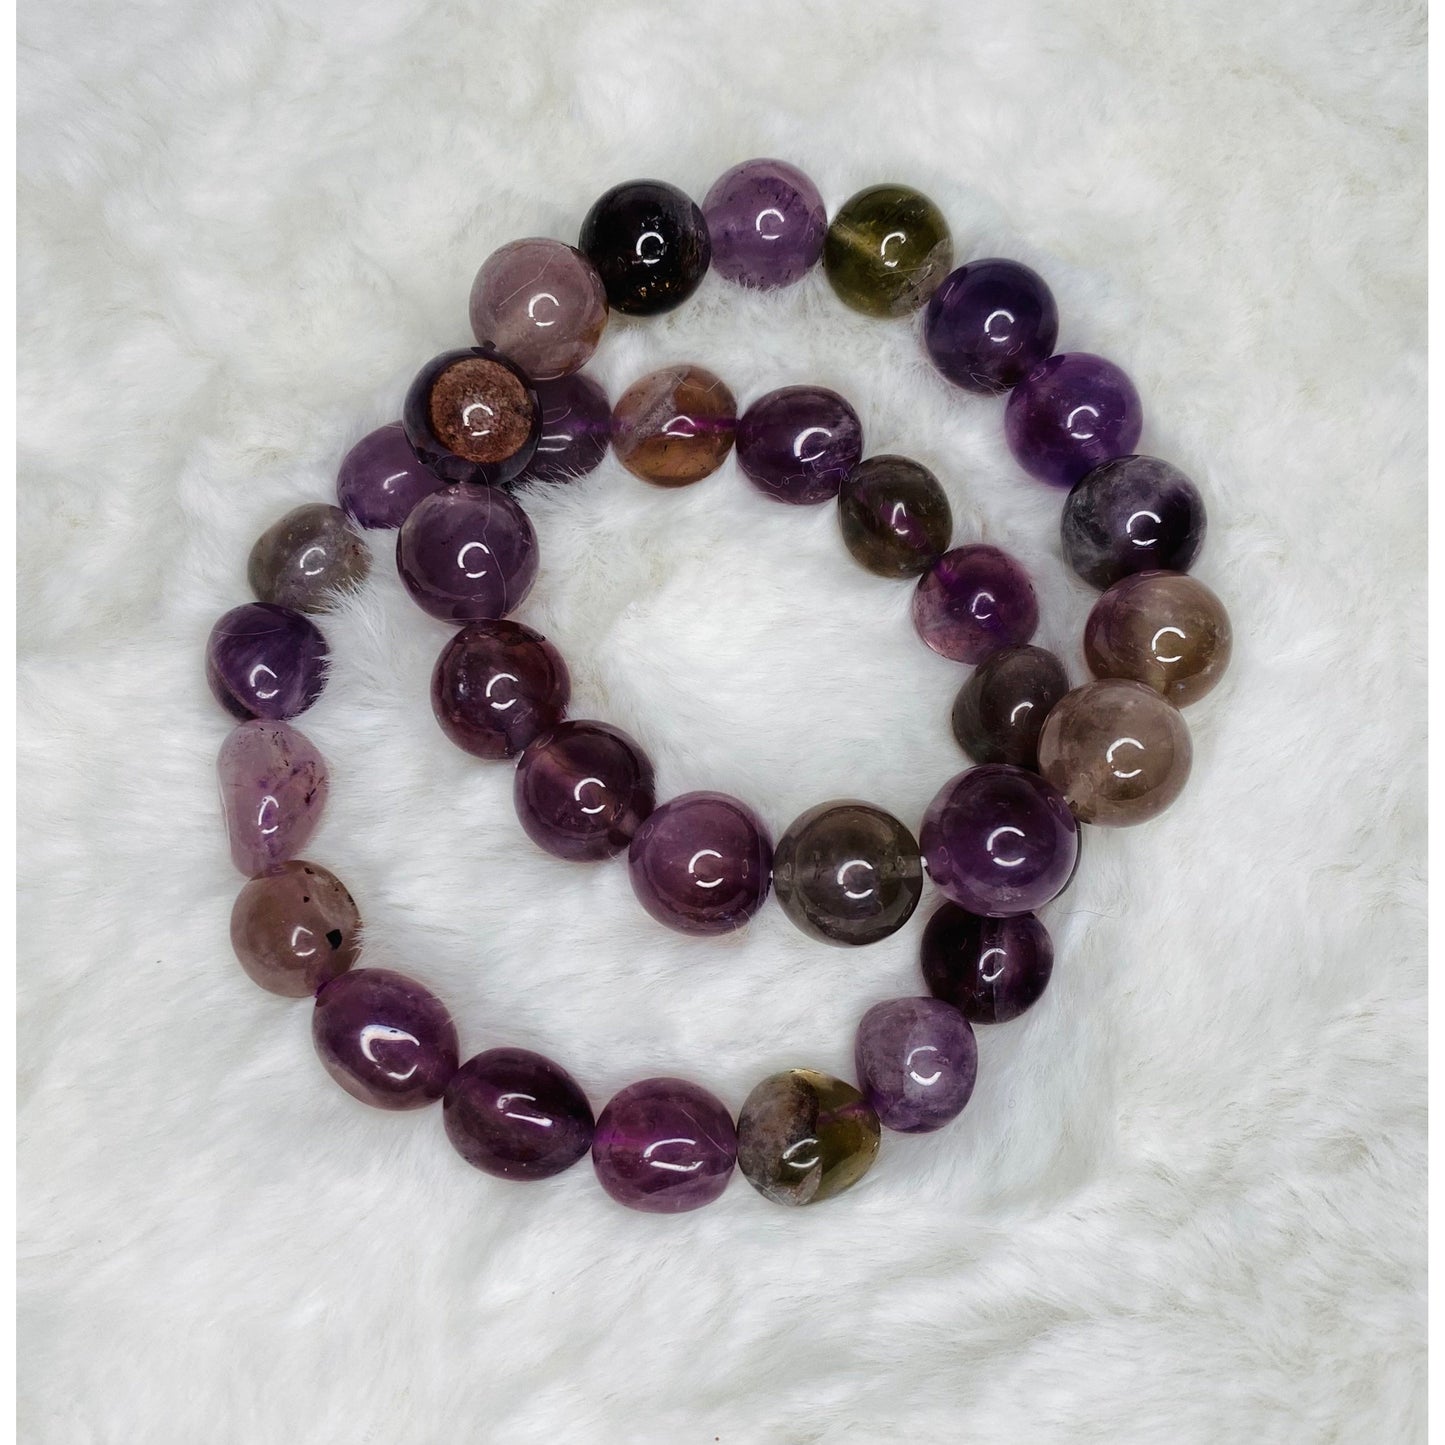 Divine Healing with the Extraordinary Auralite 23 Crystal Bracelet